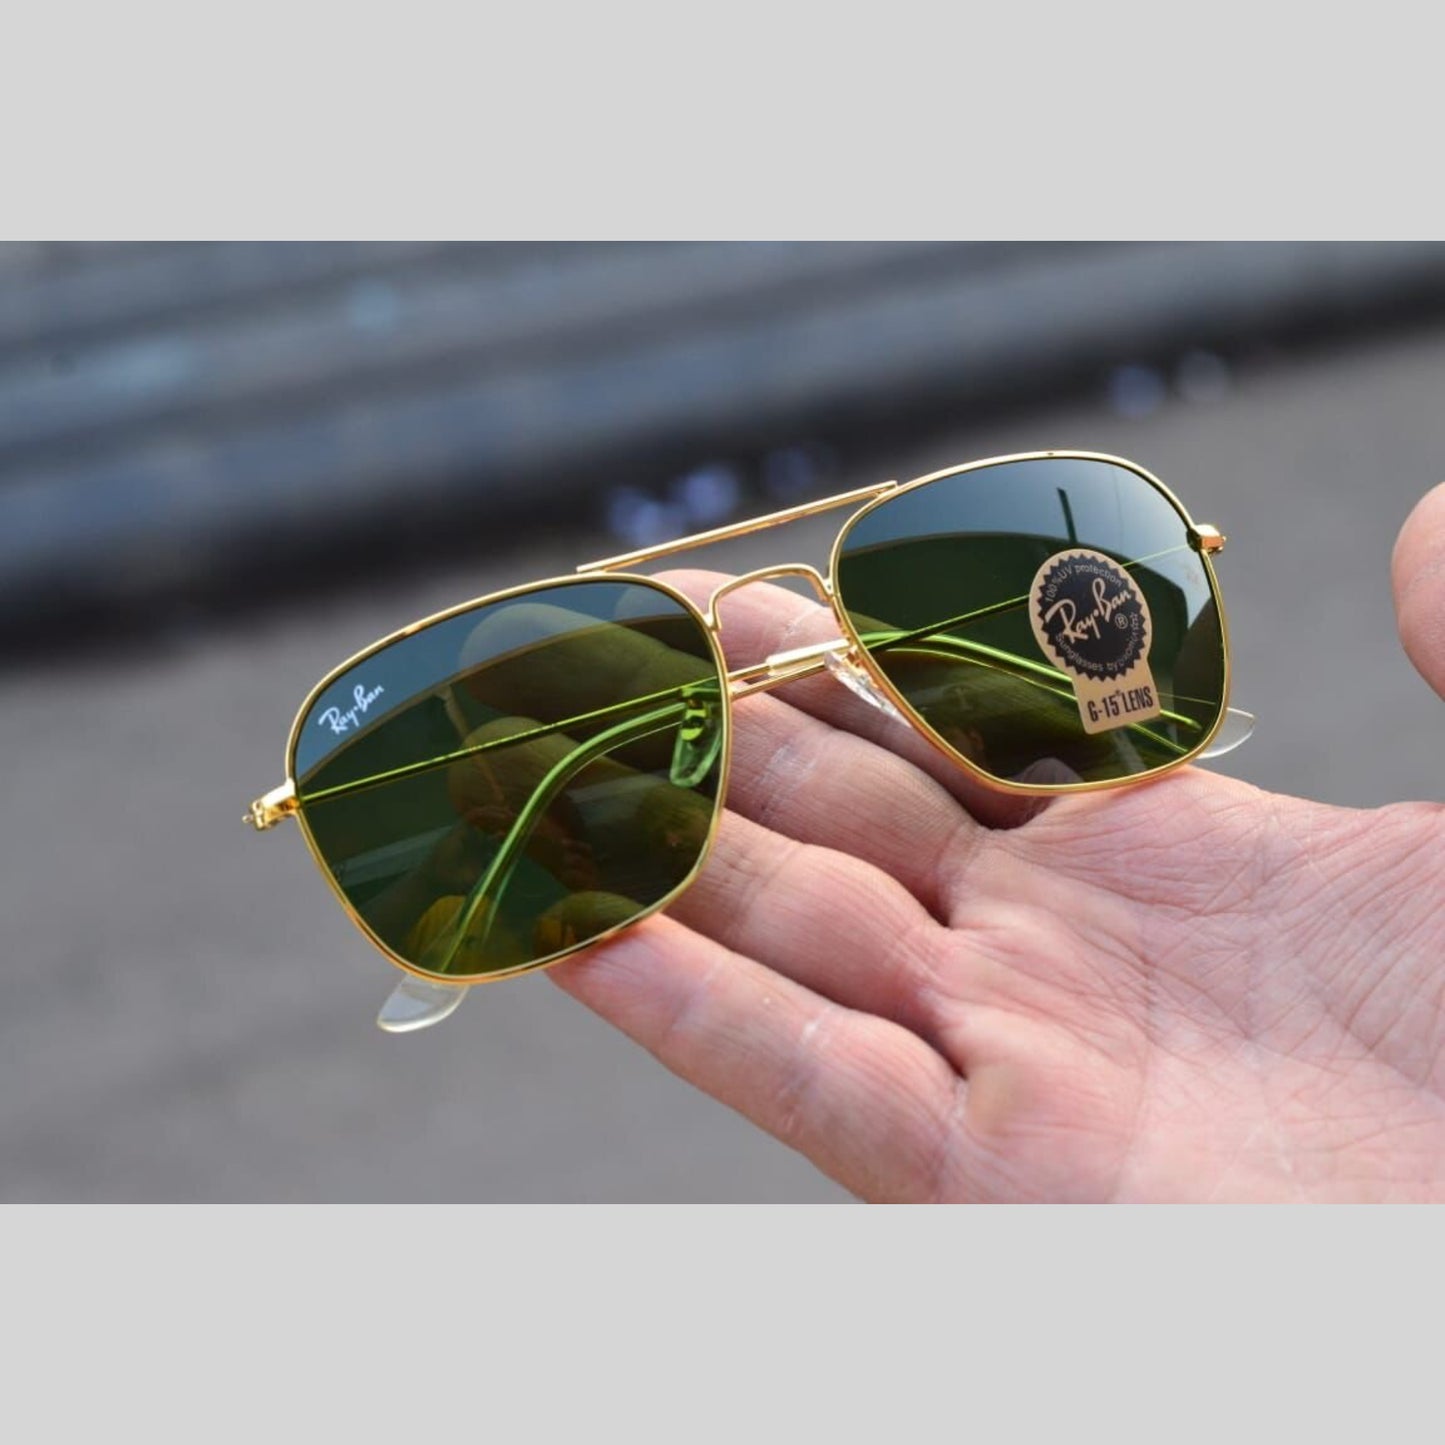 New Attractive Green & Gold 3136 Square Aviator Style Sunglass For Unisex